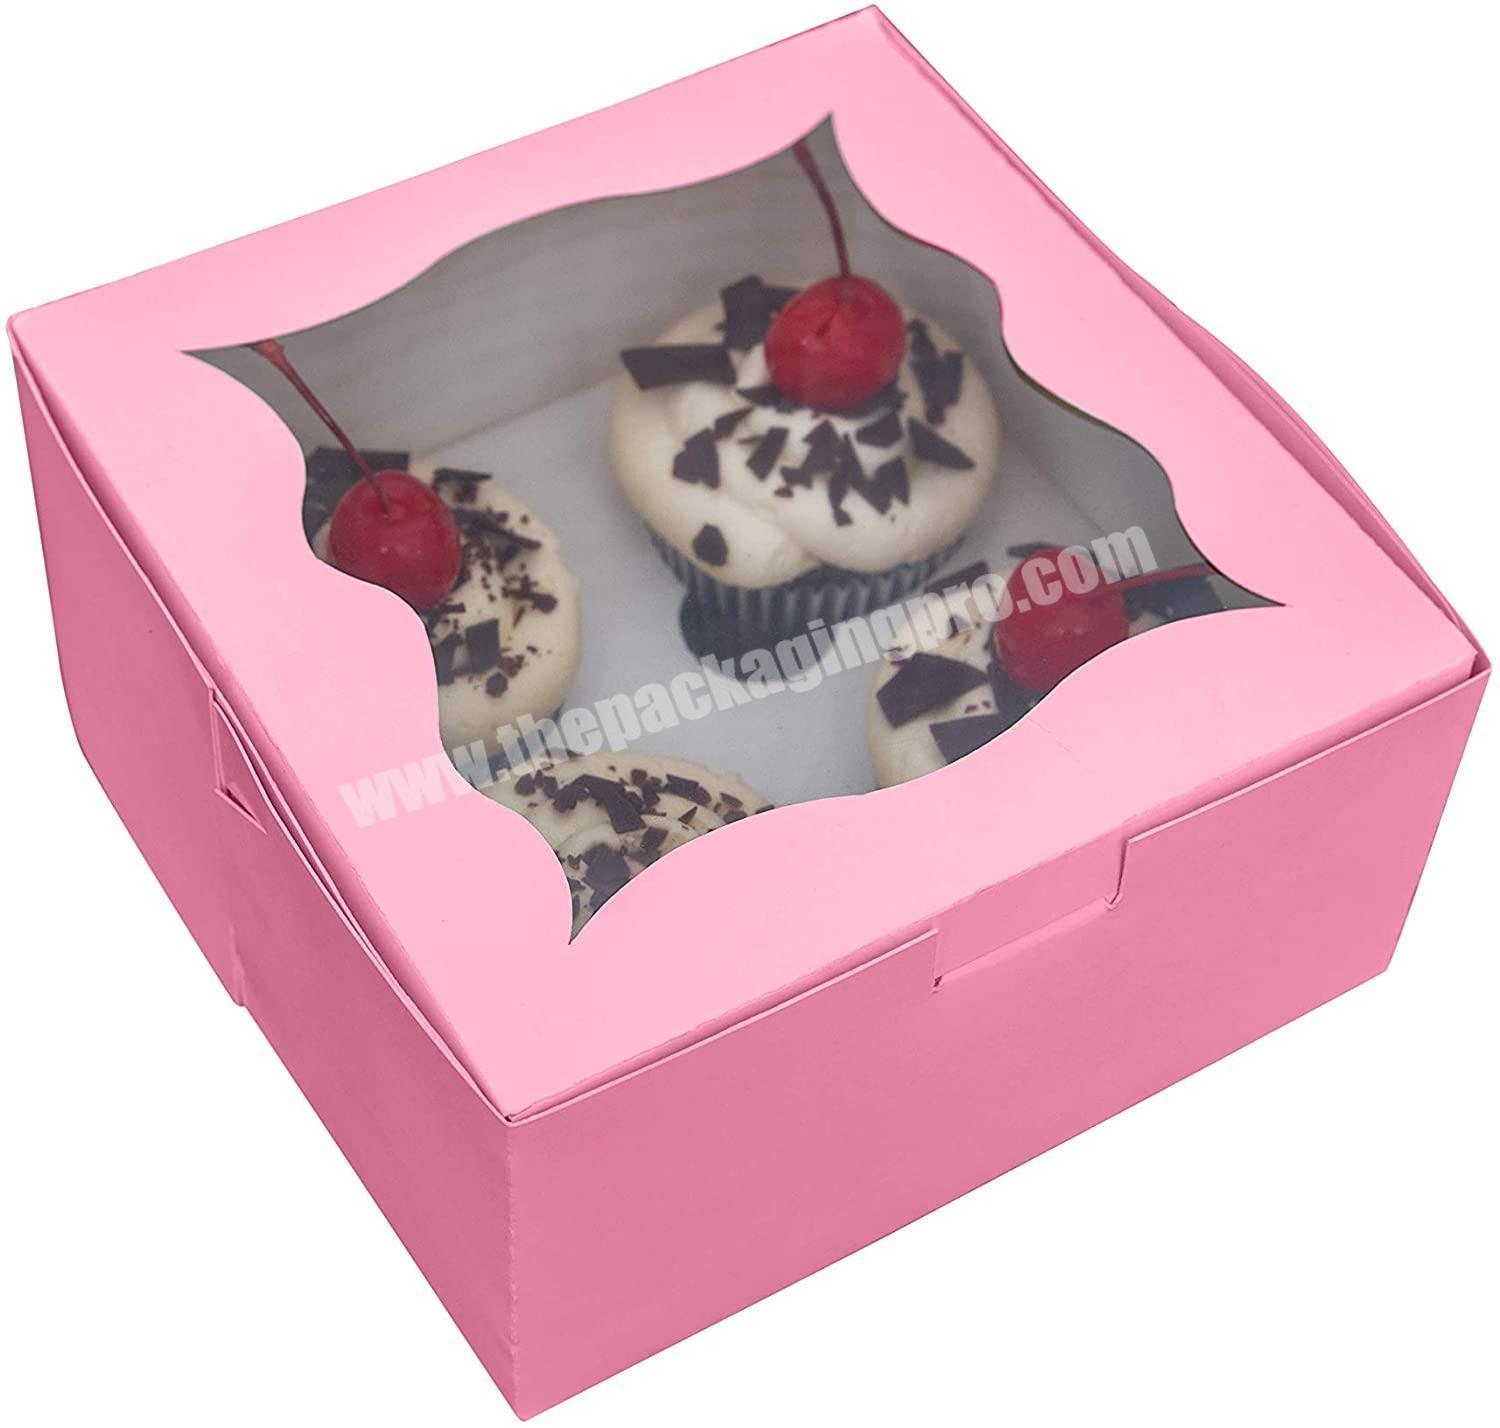 4 Piece christmas Cupcake Holder Box for Muffins, Pastries (Pink)